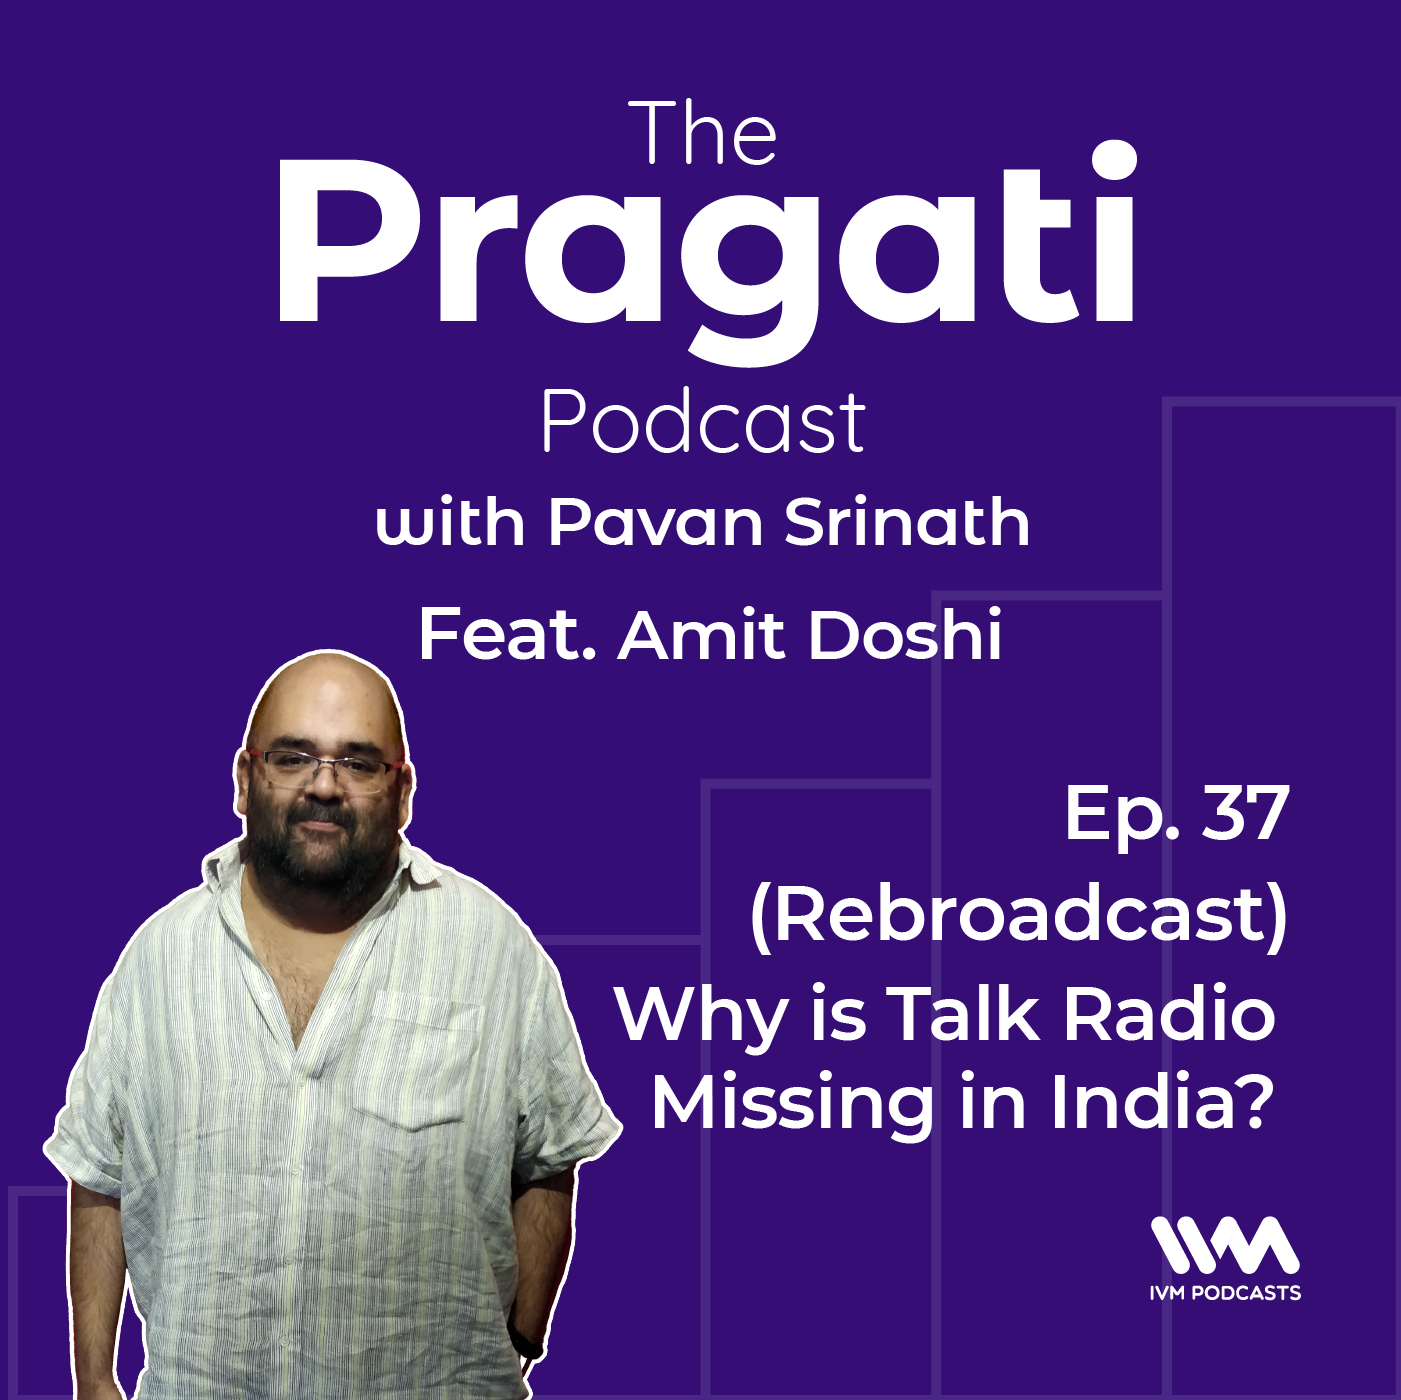 (Rebroadcast) Ep. 37: Why is Talk Radio Missing in India?